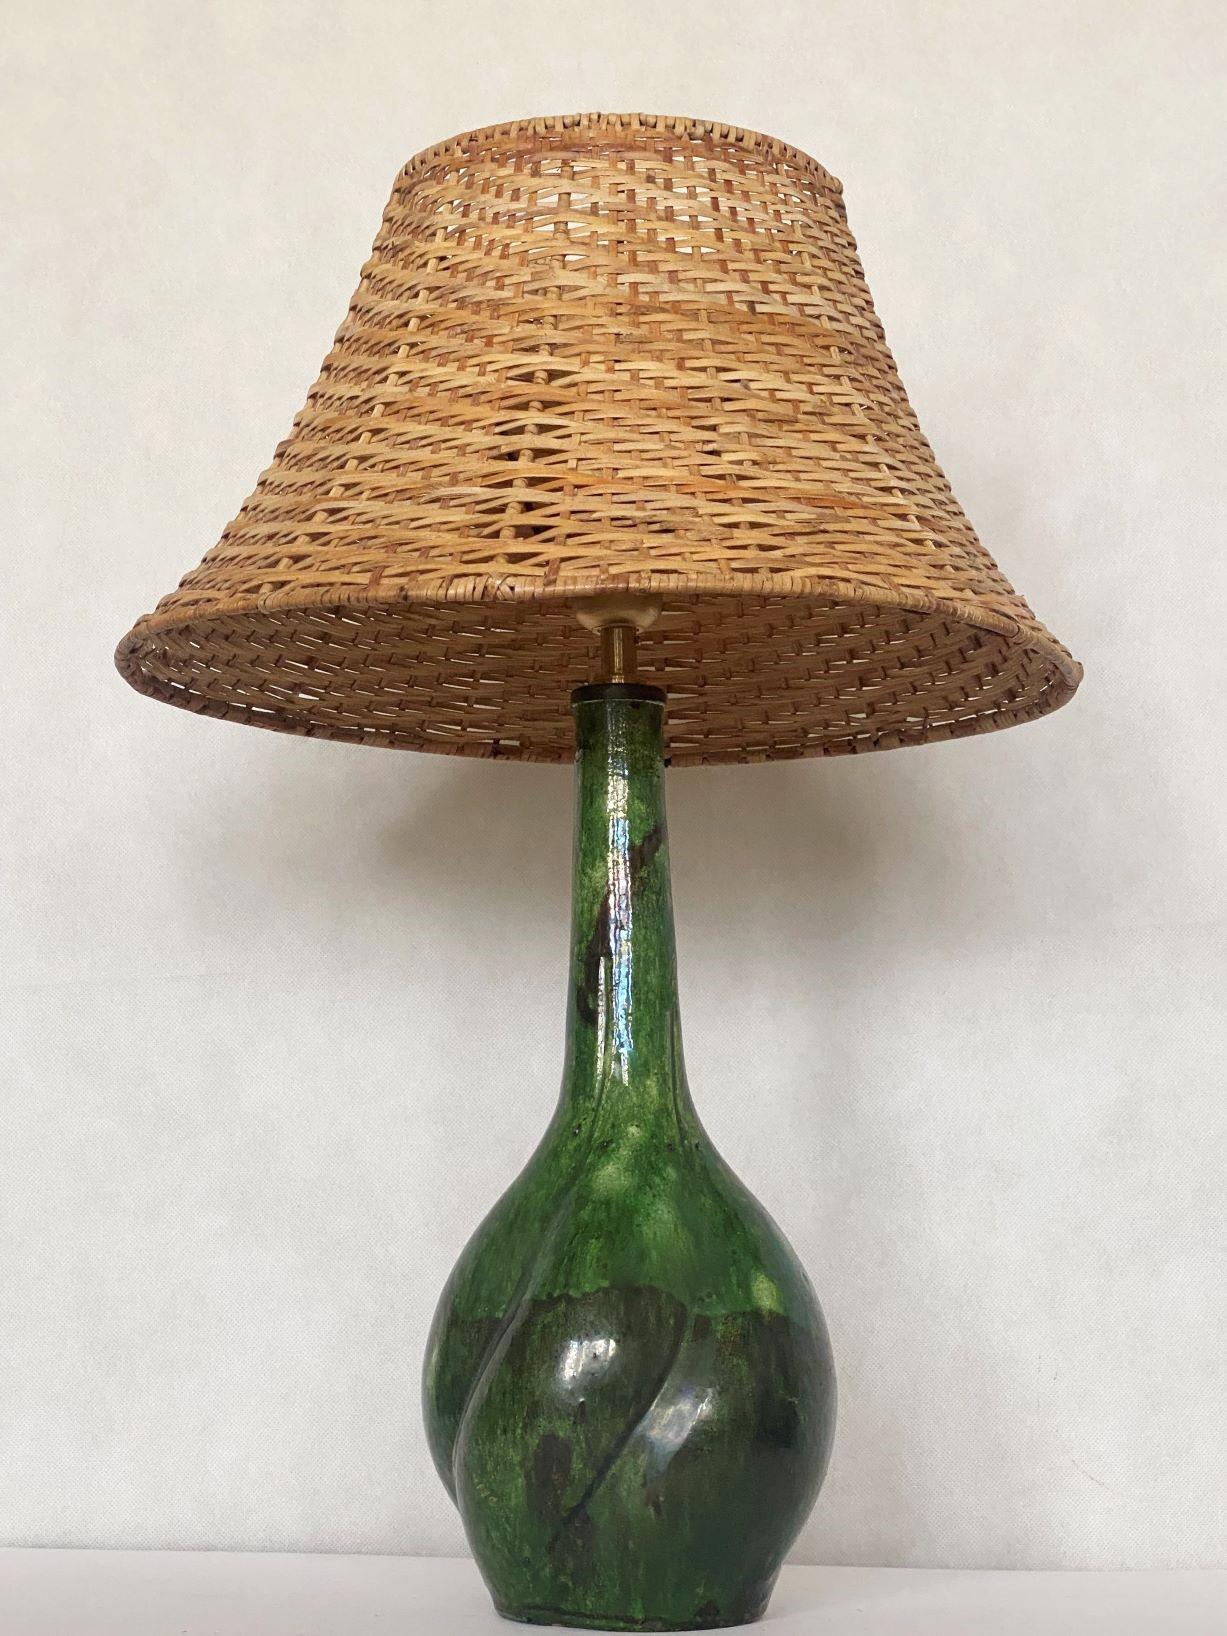 Glazed Danish Hand-Painted Glased Ceramic Table Lamp with Wicker Shade, 1960s For Sale